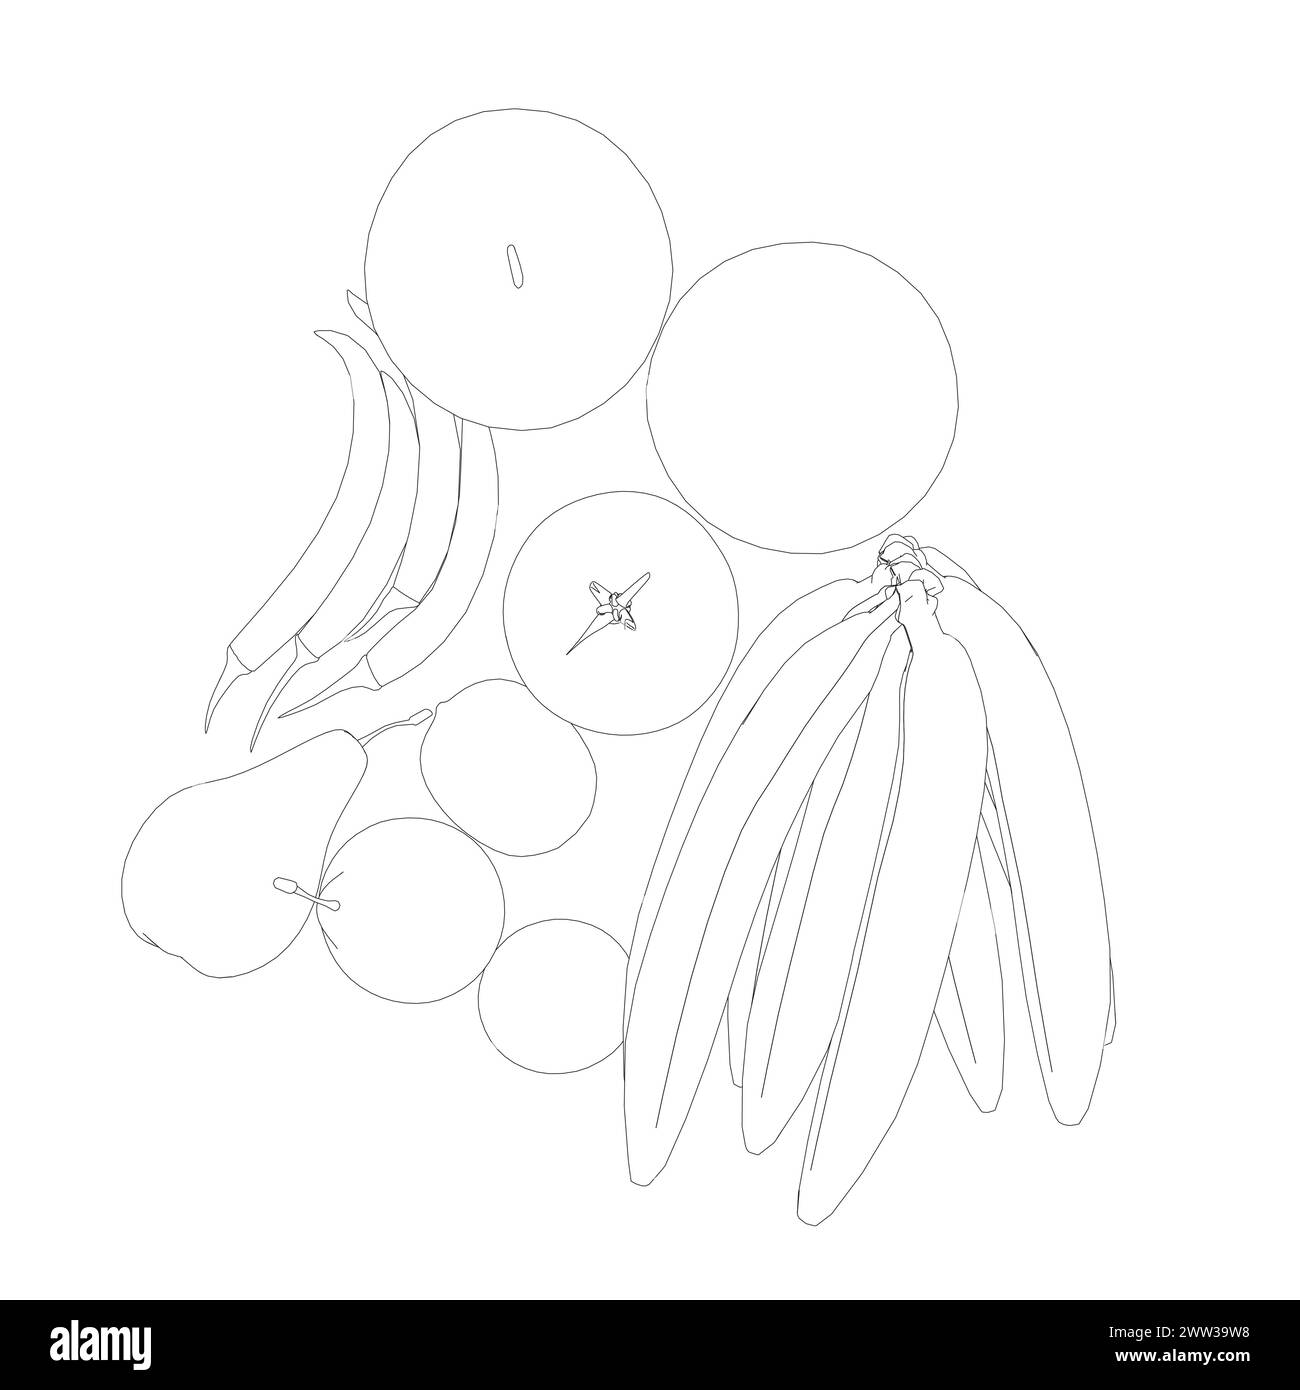 Fruit outline: bananas, apples, pears, peppers, tomato made of black lines isolated on a white background. Vector illustration. Stock Vector